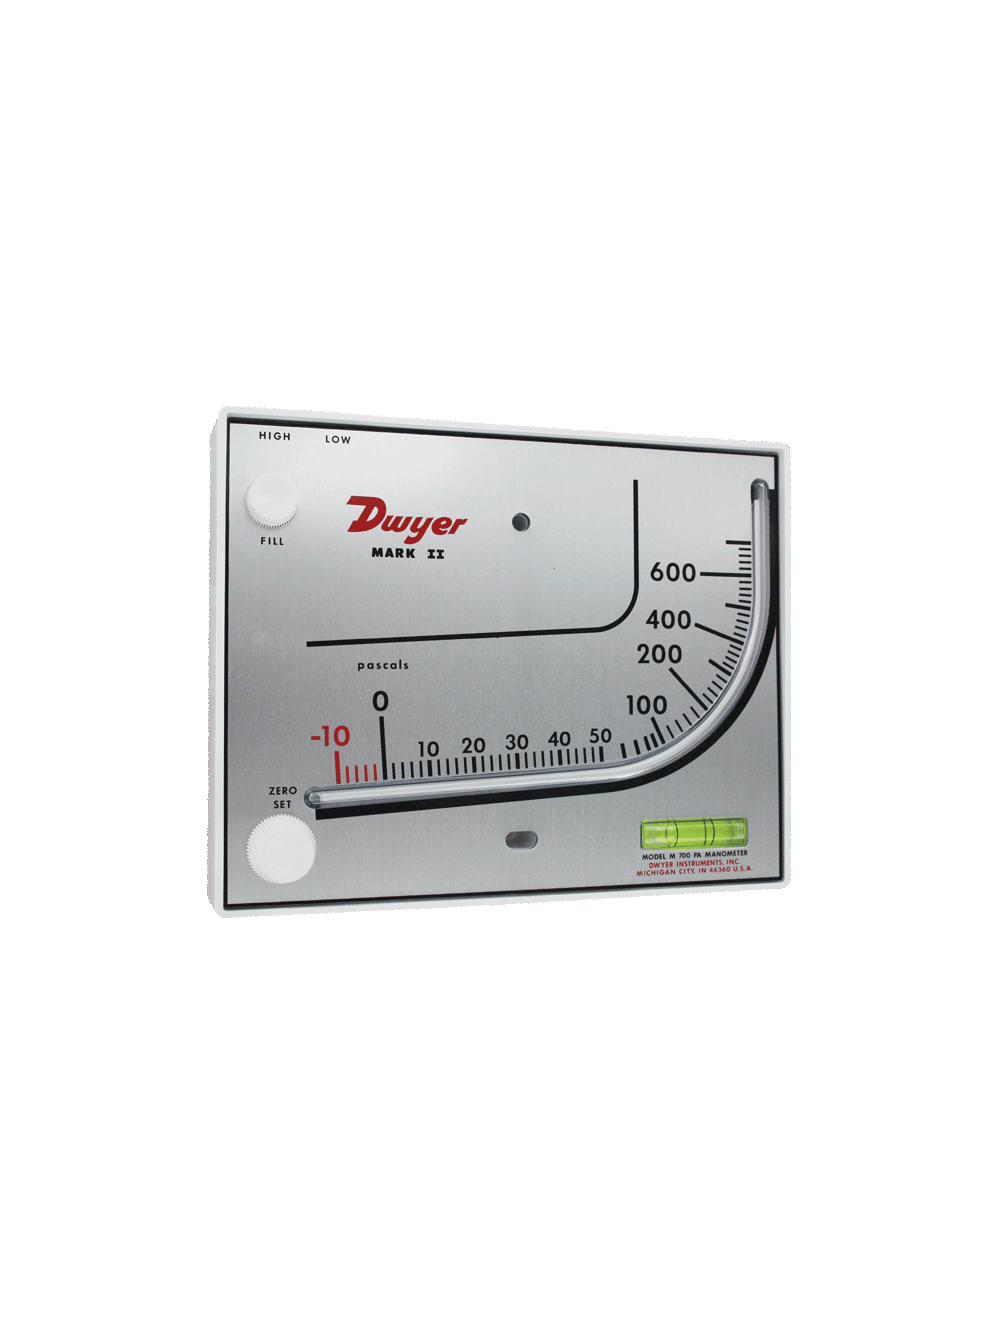 0.826 sp Red Gauge Fluid Fоur Расk Inclined-Vertical Scale Dwyer Series Mark II 25 Molded Plastic Manometer gr. 0 to 3 inH2O Measuring Range 